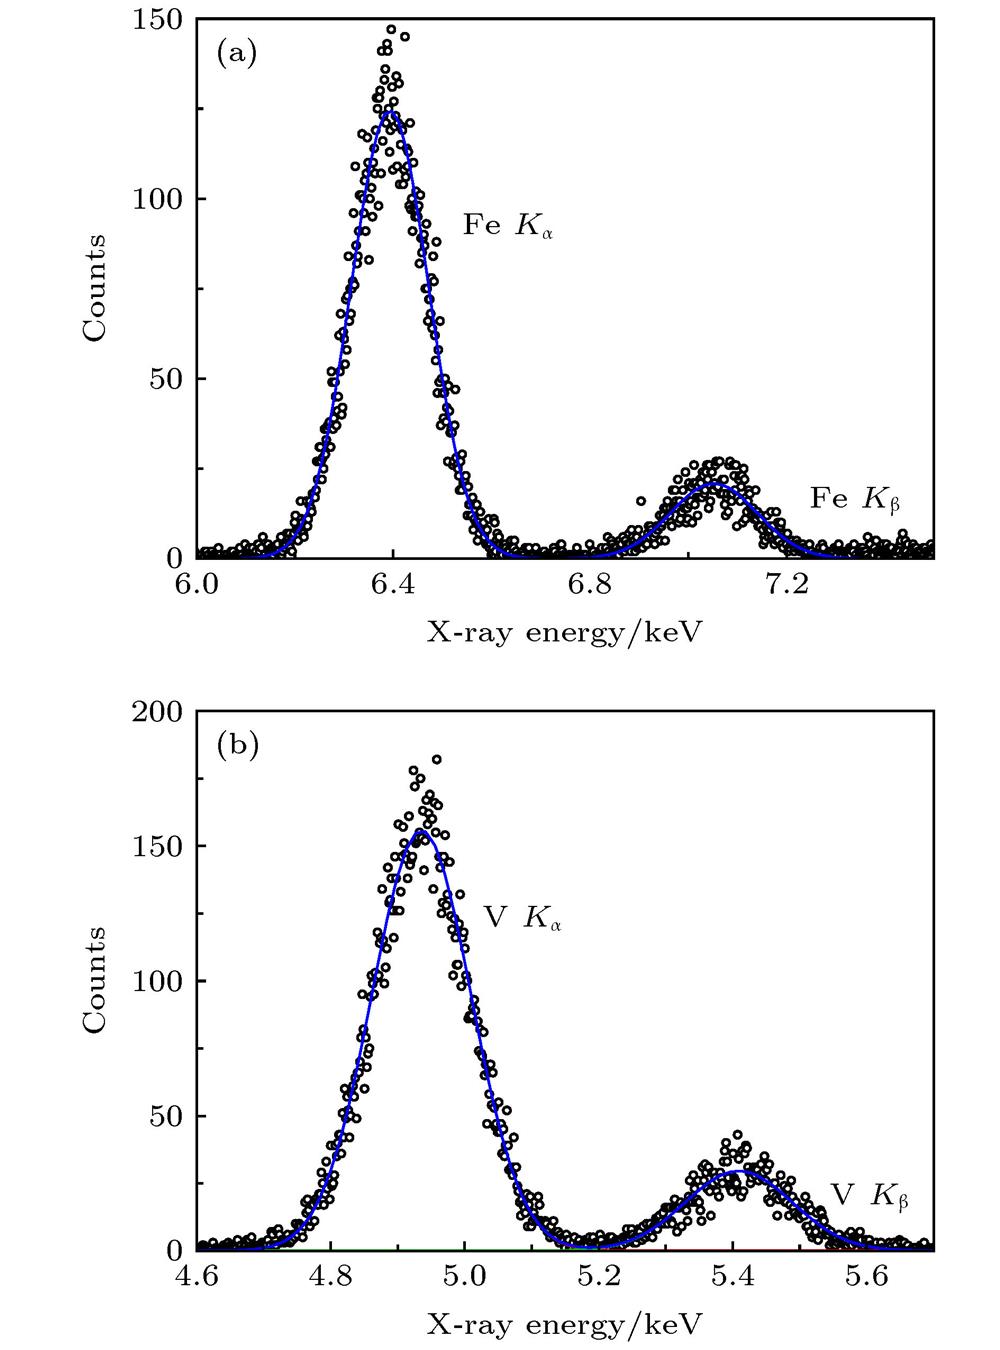 Characteristic K X-ray spectrum of Fe and V induced by impact with bremsstrahlung with central energy of 13.1 keV and measured at the emission angle of 150°: (a) Target Fe; (b) target V.